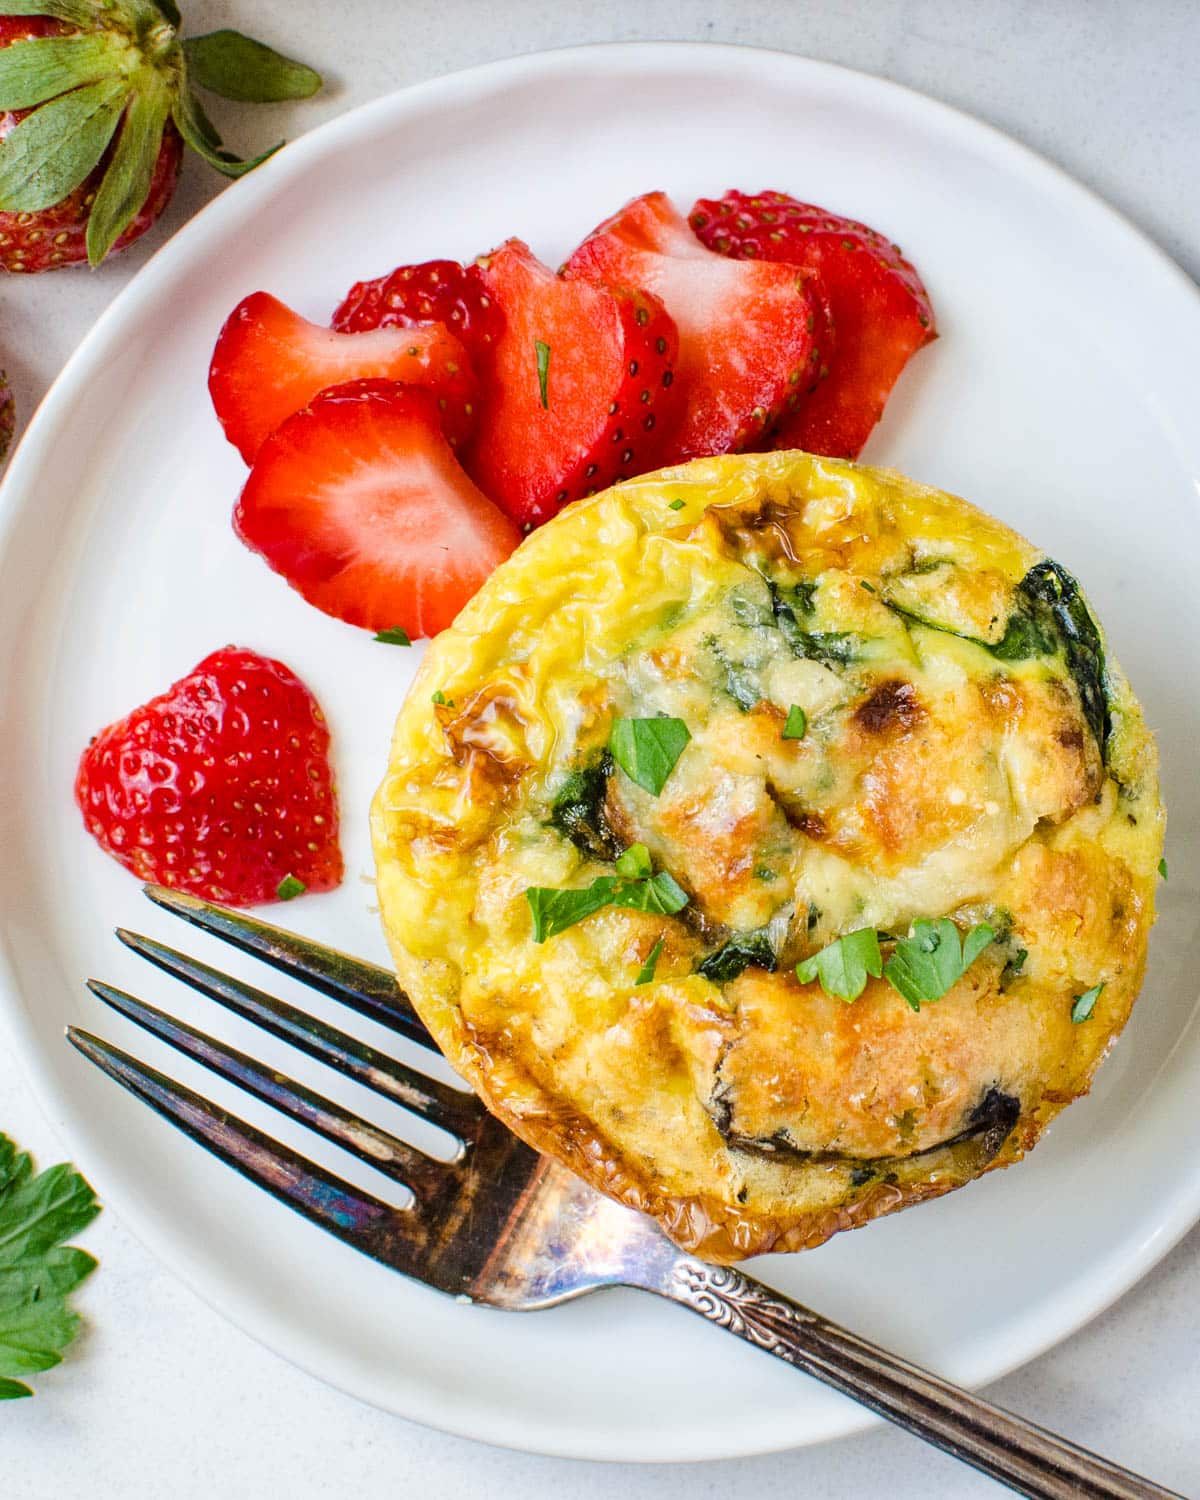 Individual Mushroom and spinach frittatas on a plate with strawberries.